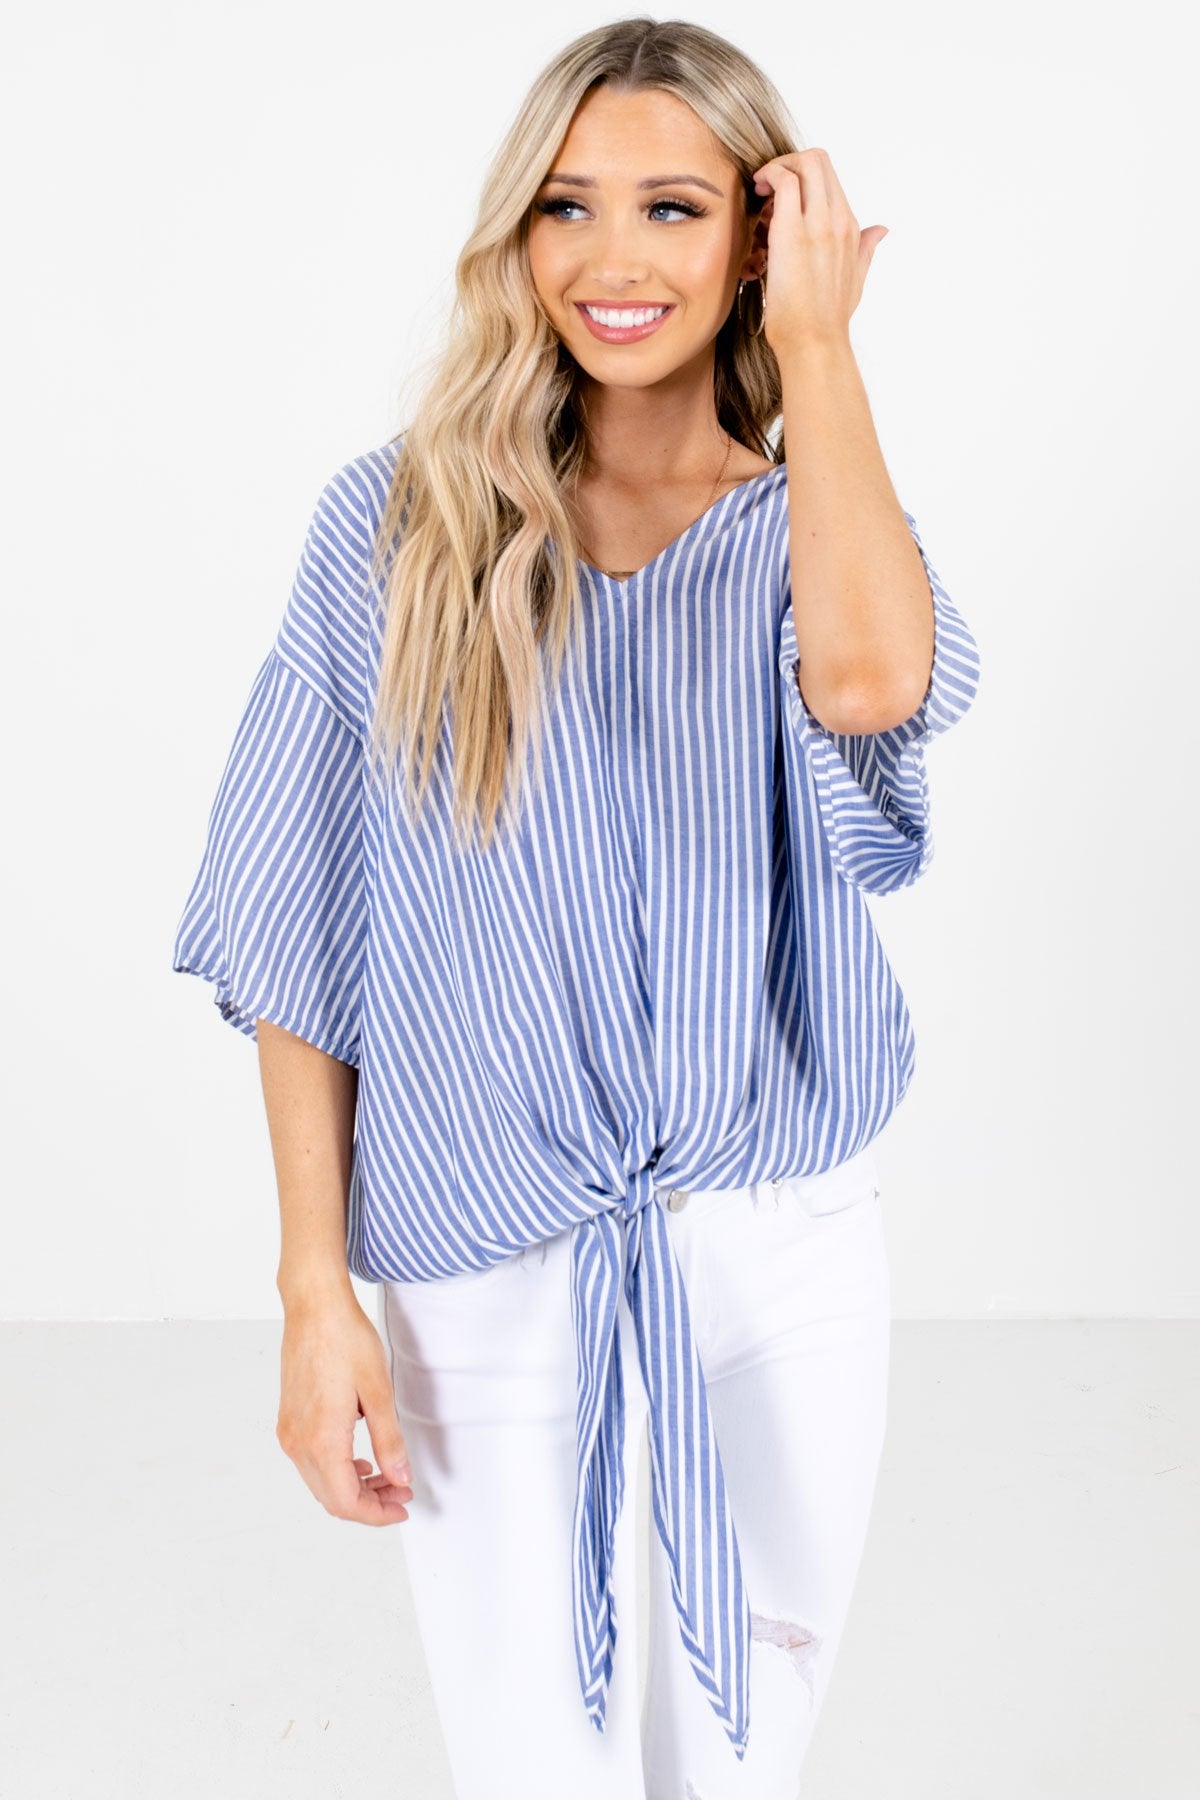 Blue and White Stripe Patterned Boutique Tops for Women